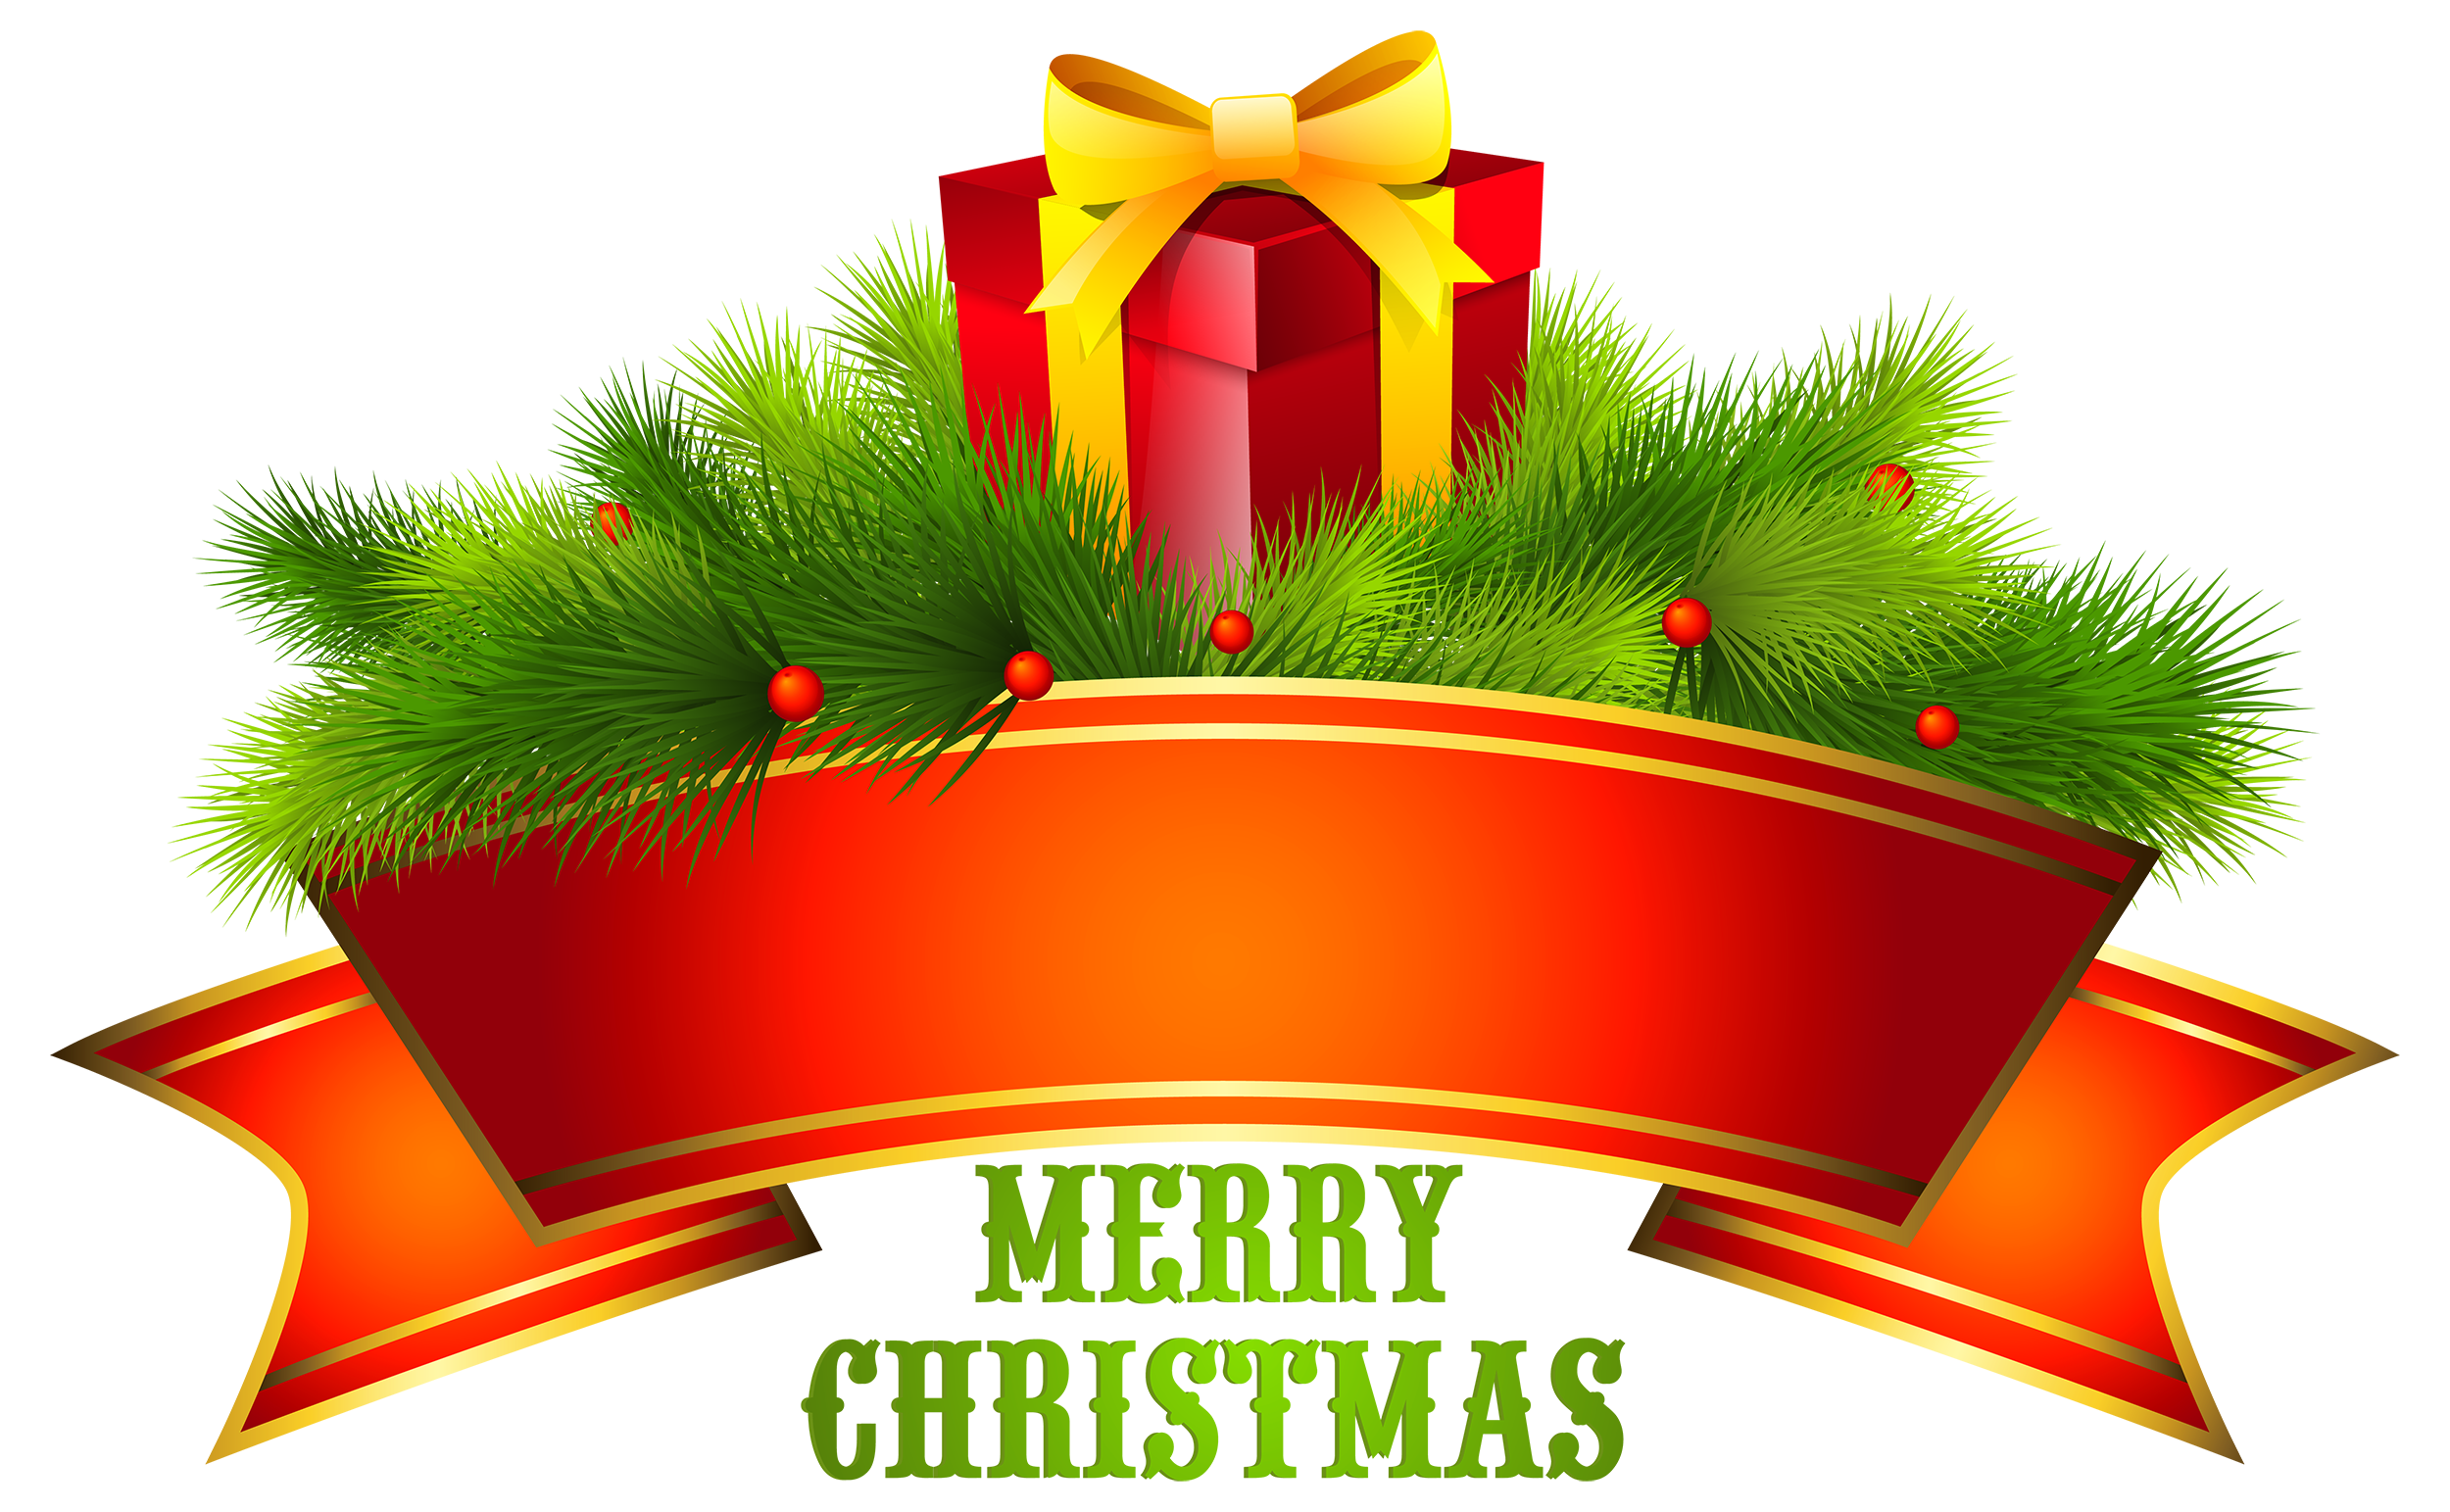 Merry christmas images clip art merry and new year image